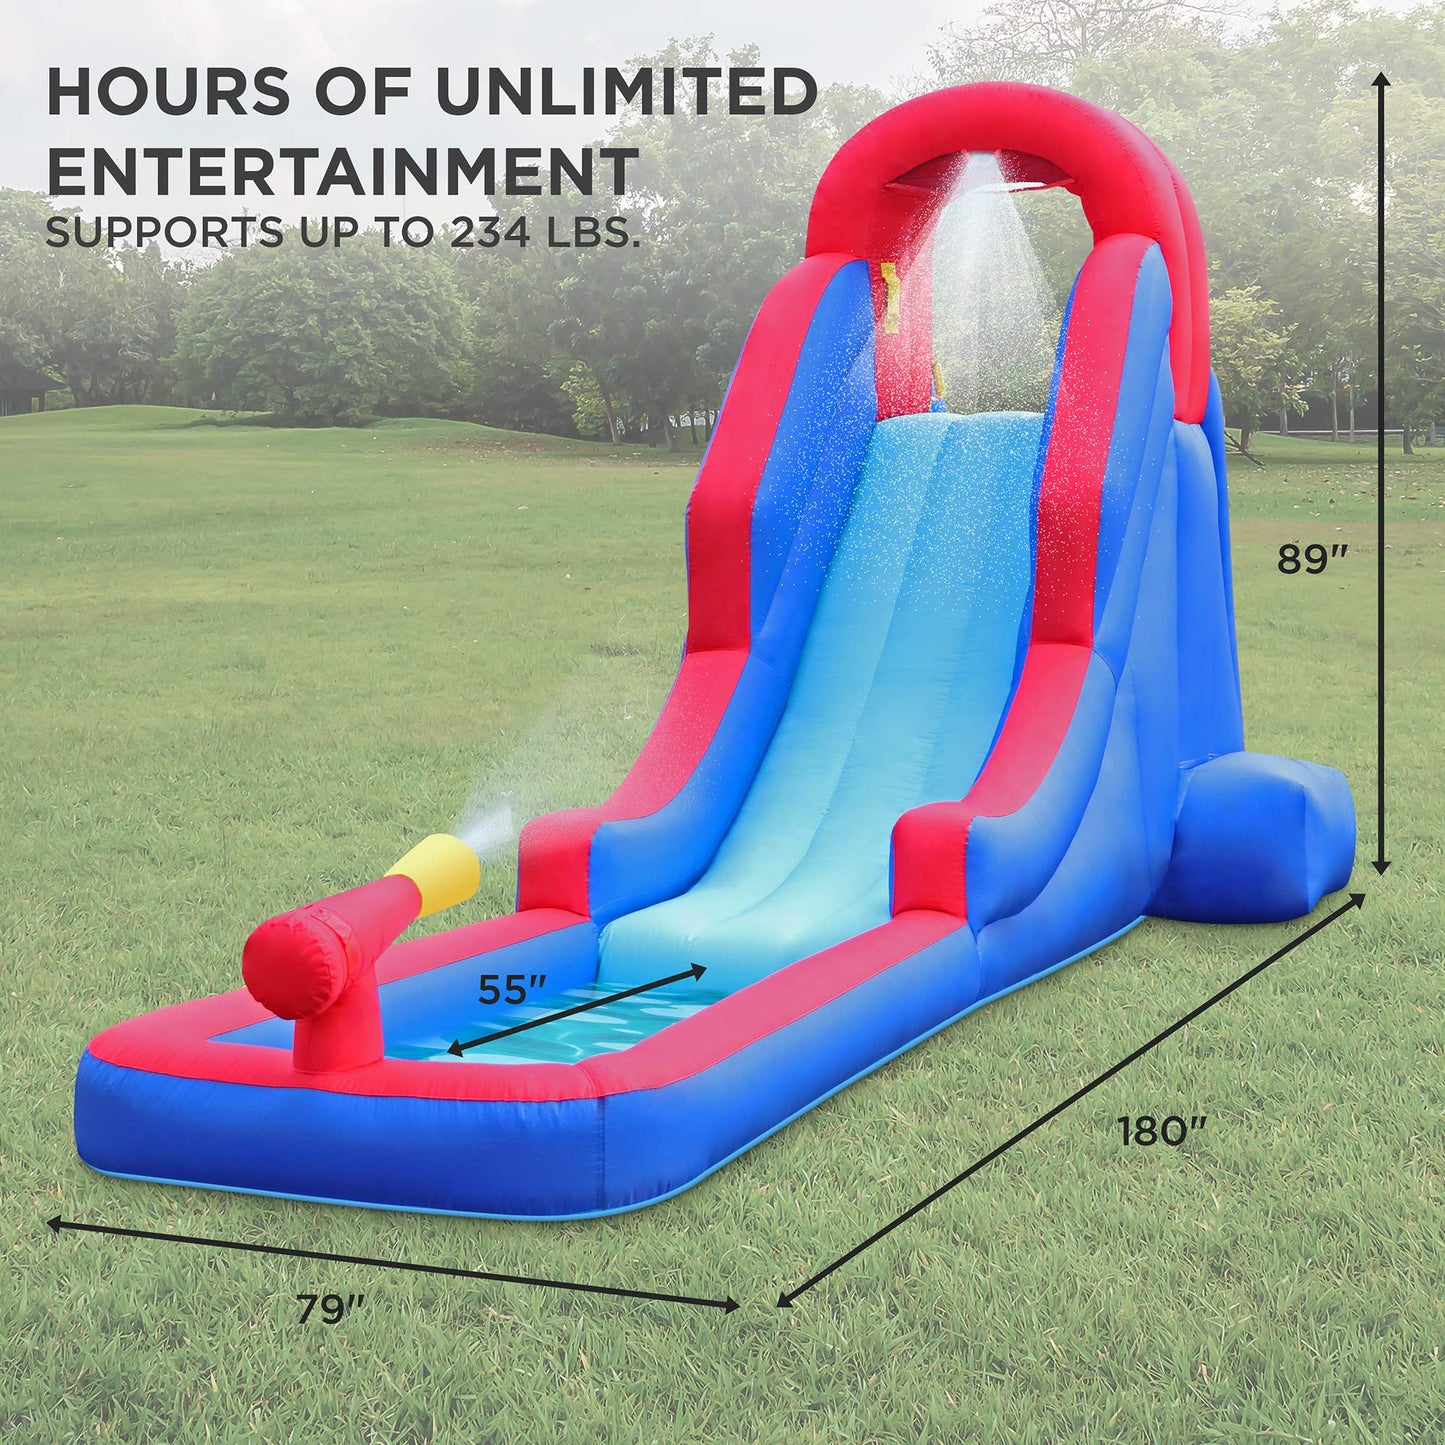 Sunny & Fun Compact Inflatable Water Slide Park – Heavy-Duty Nylon for Outdoor Fun - Climbing Wall, Slide, & Small Splash Pool – Easy to Set Up & Inflate with Included Air Pump & Carrying Case Blue/Red